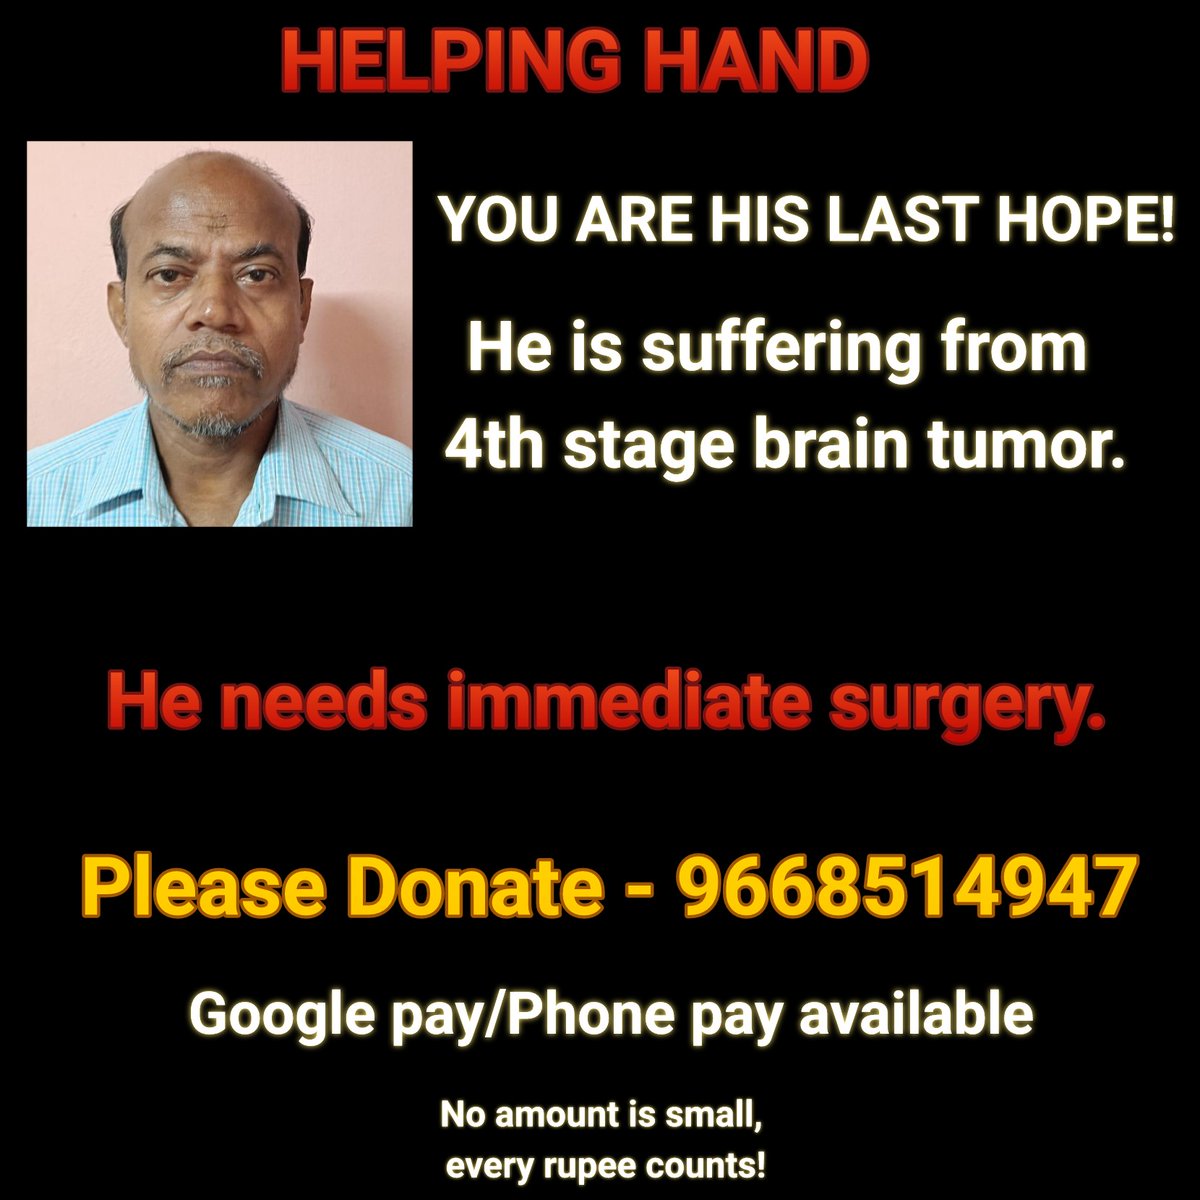 Helping someone will make you feel better. Do your part help him to get better

Gpay/phonepay- 9668514947

SAVE AMAR LIFE